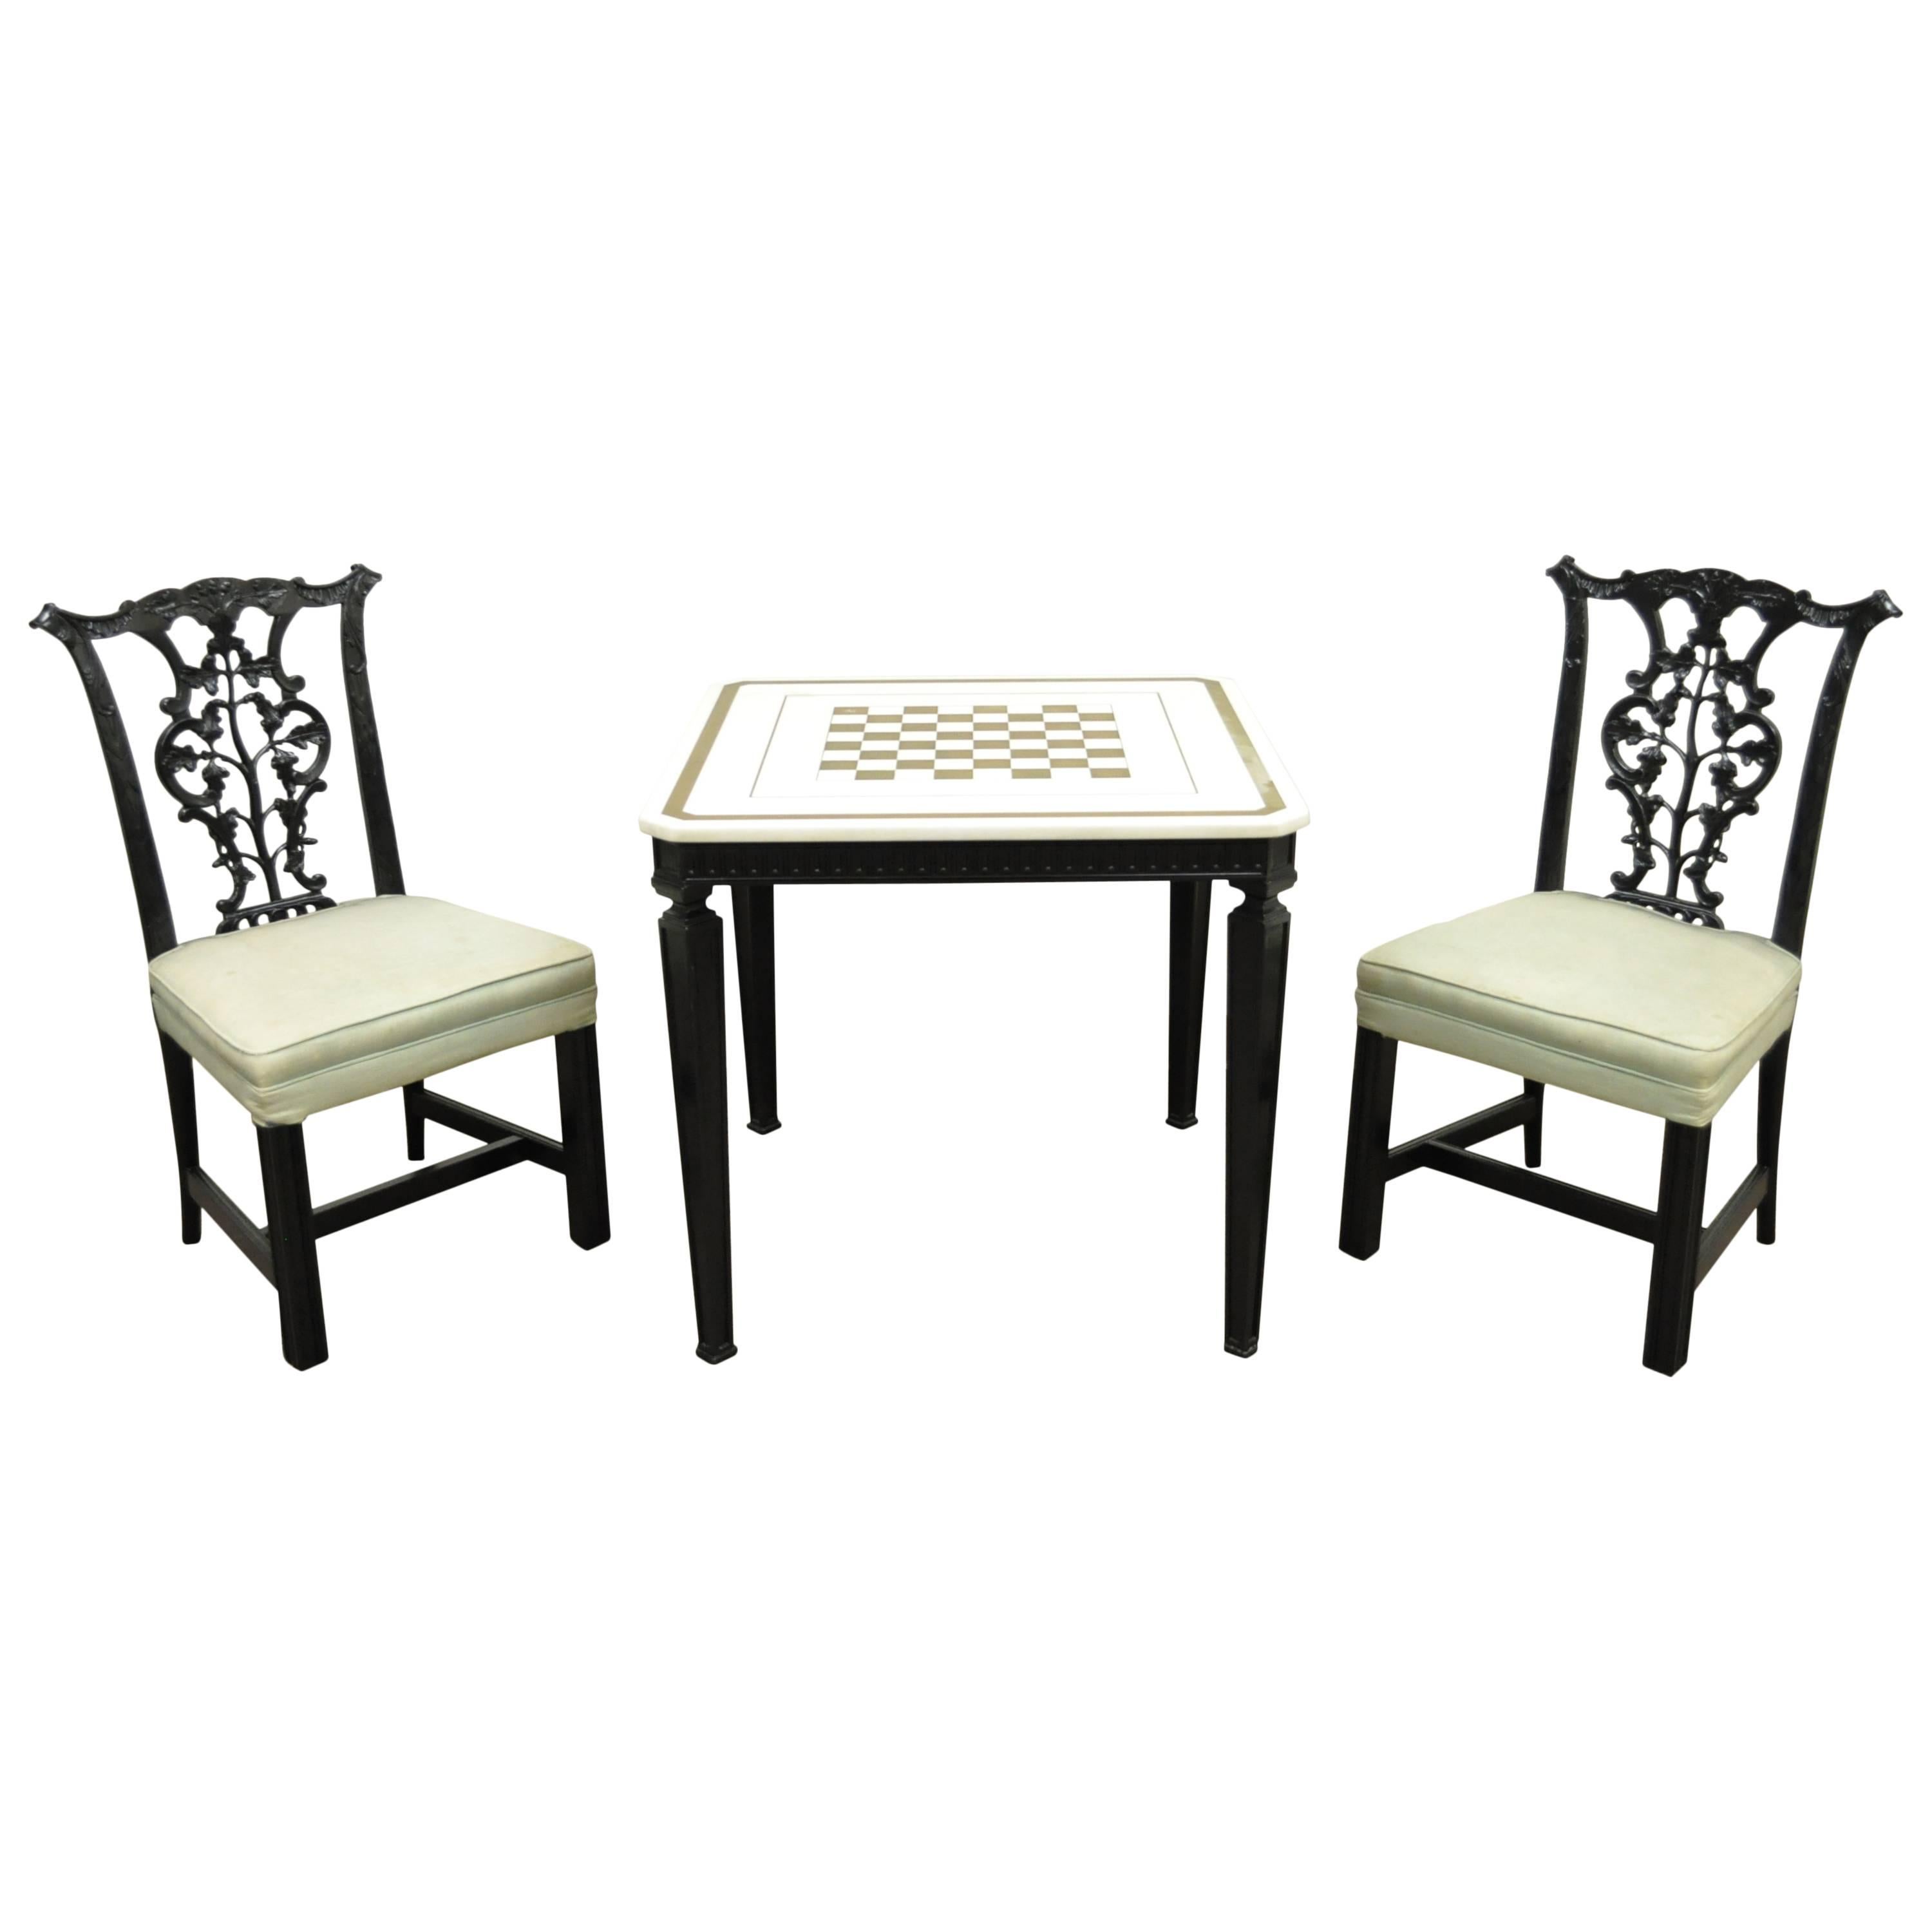 1940s Chippendale or George III Style Marble-Top Game Table Set with Two Chairs